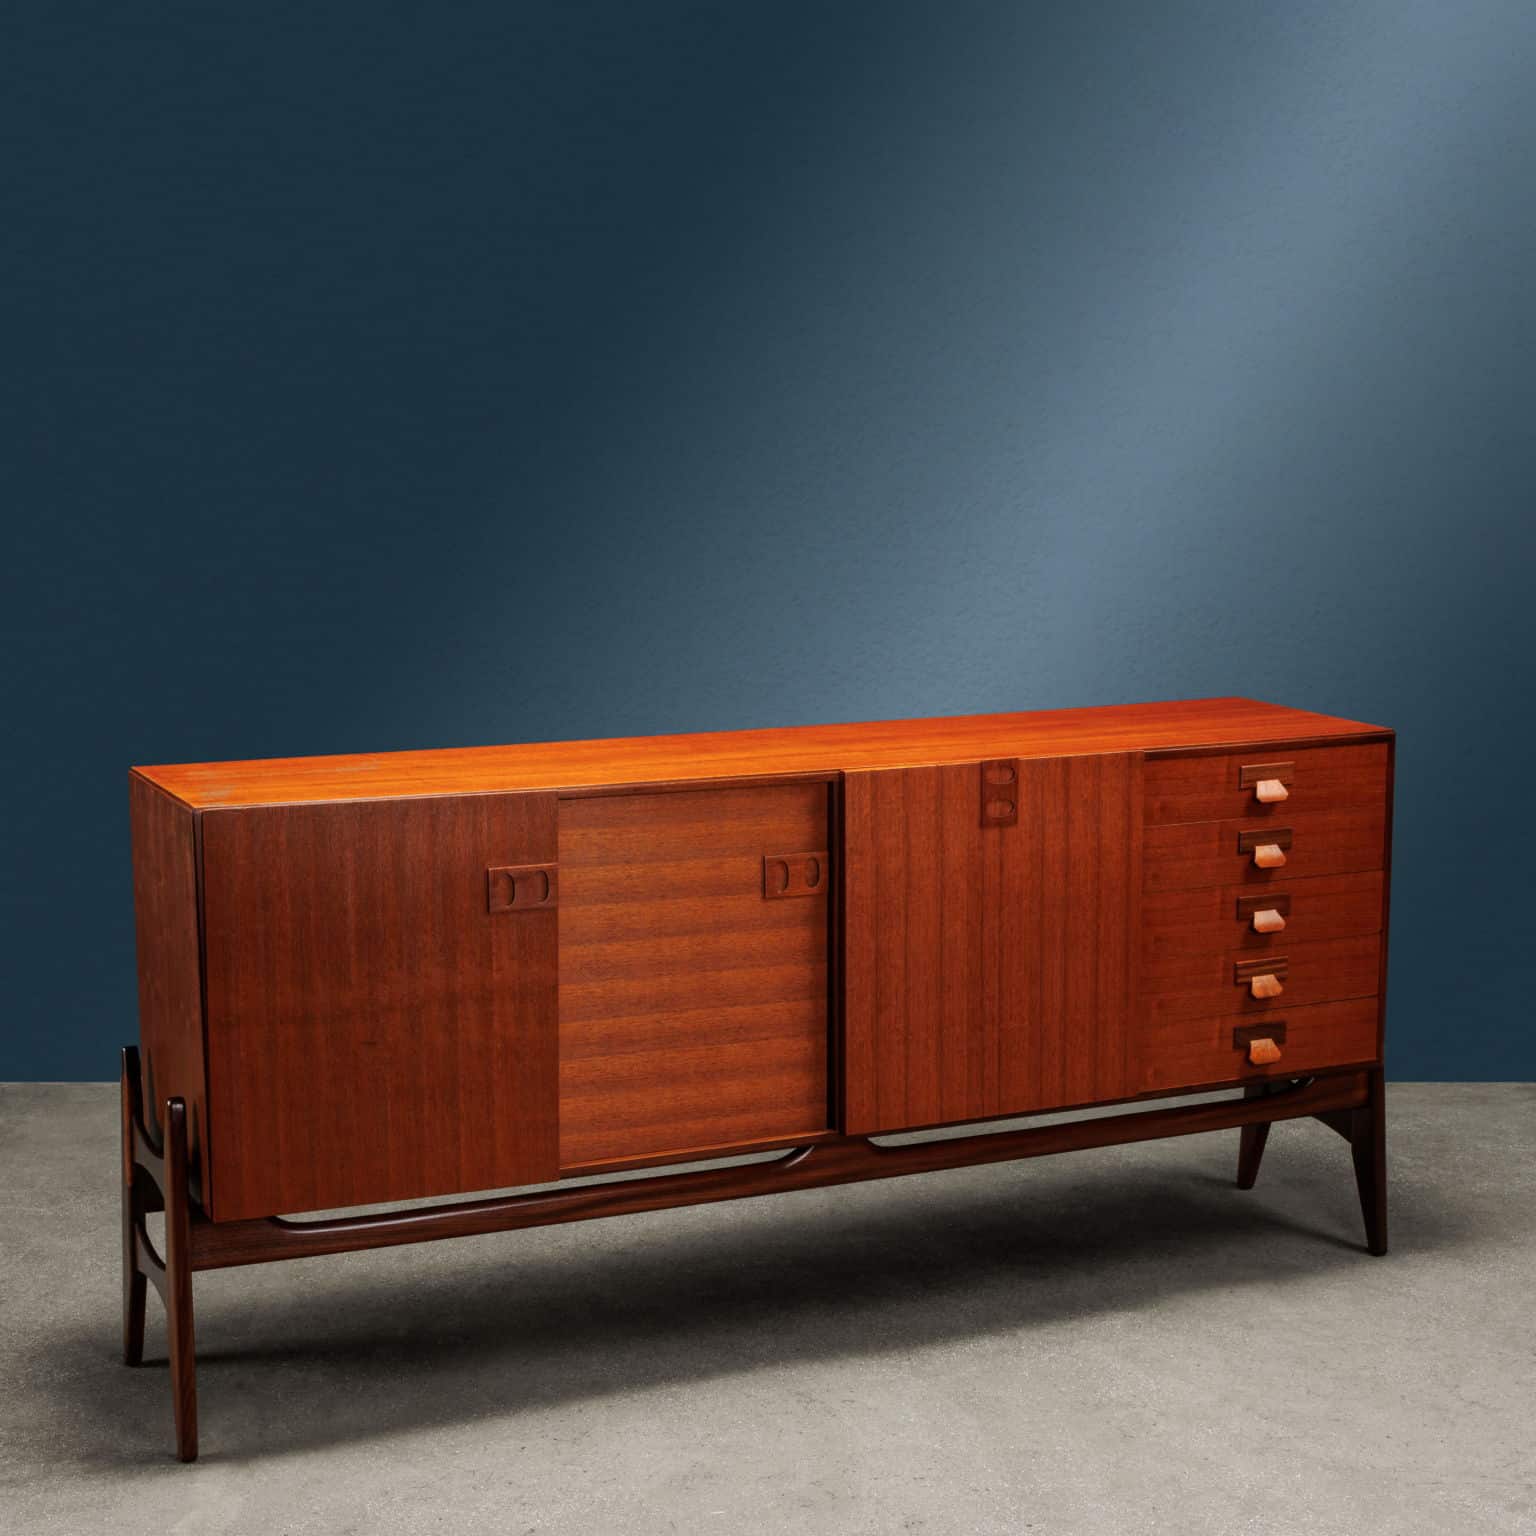 Sideboard from the 50s and 60s by Fratelli Proserpio